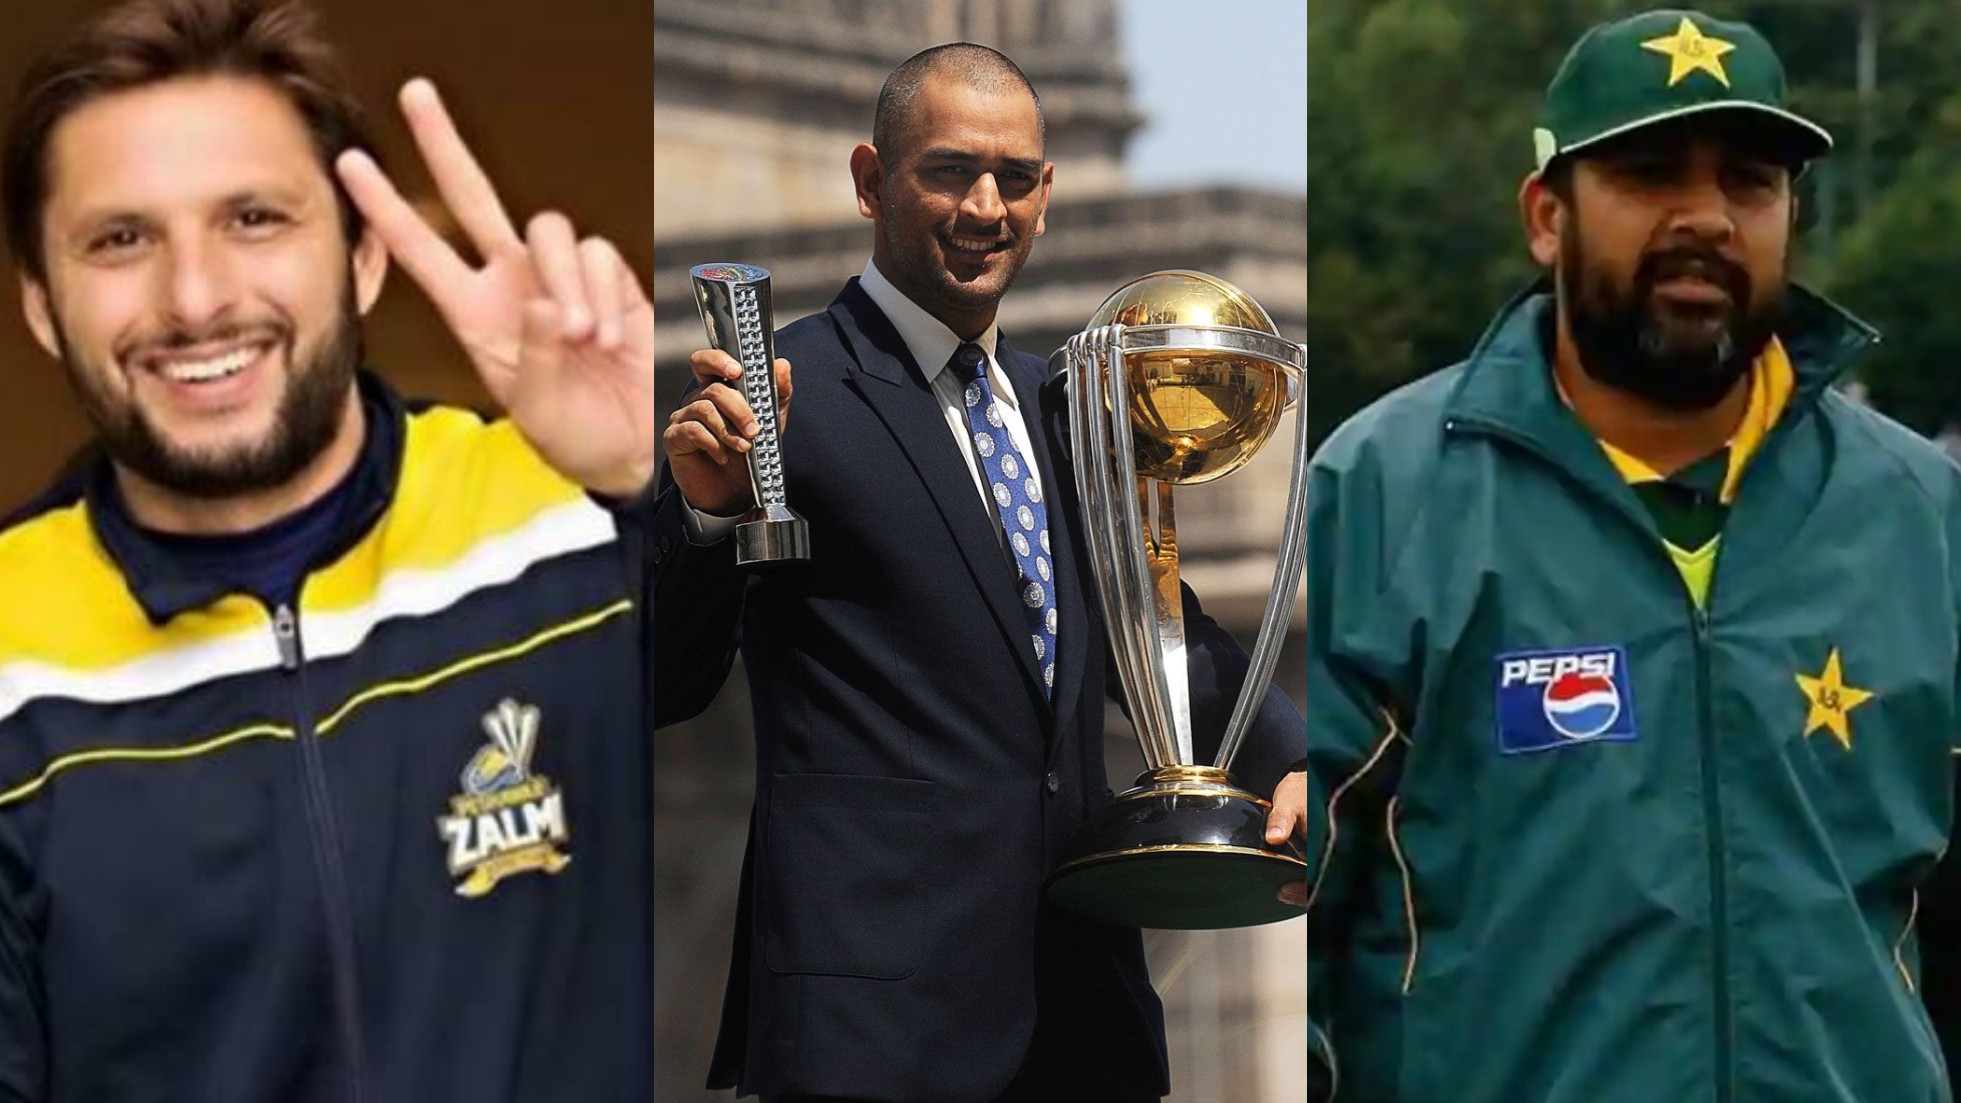 “MS Dhoni of the greatest captains ever” Pakistan cricketers pay tribute to Dhoni after he retires